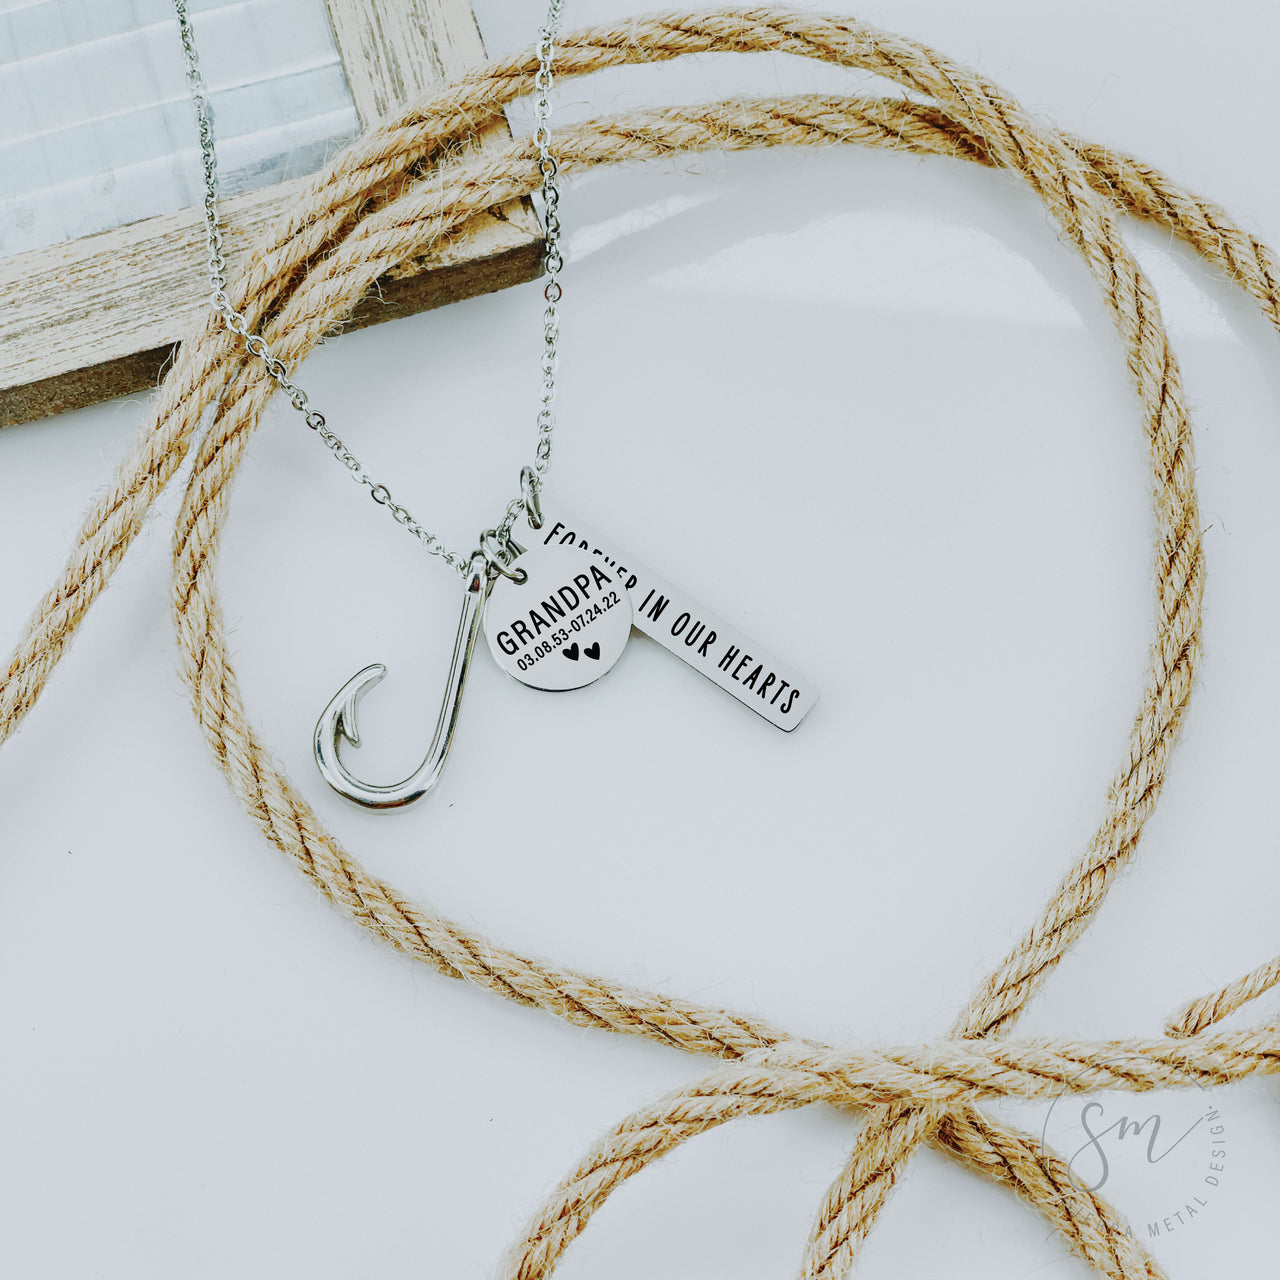 Fishing In Heaven Necklace